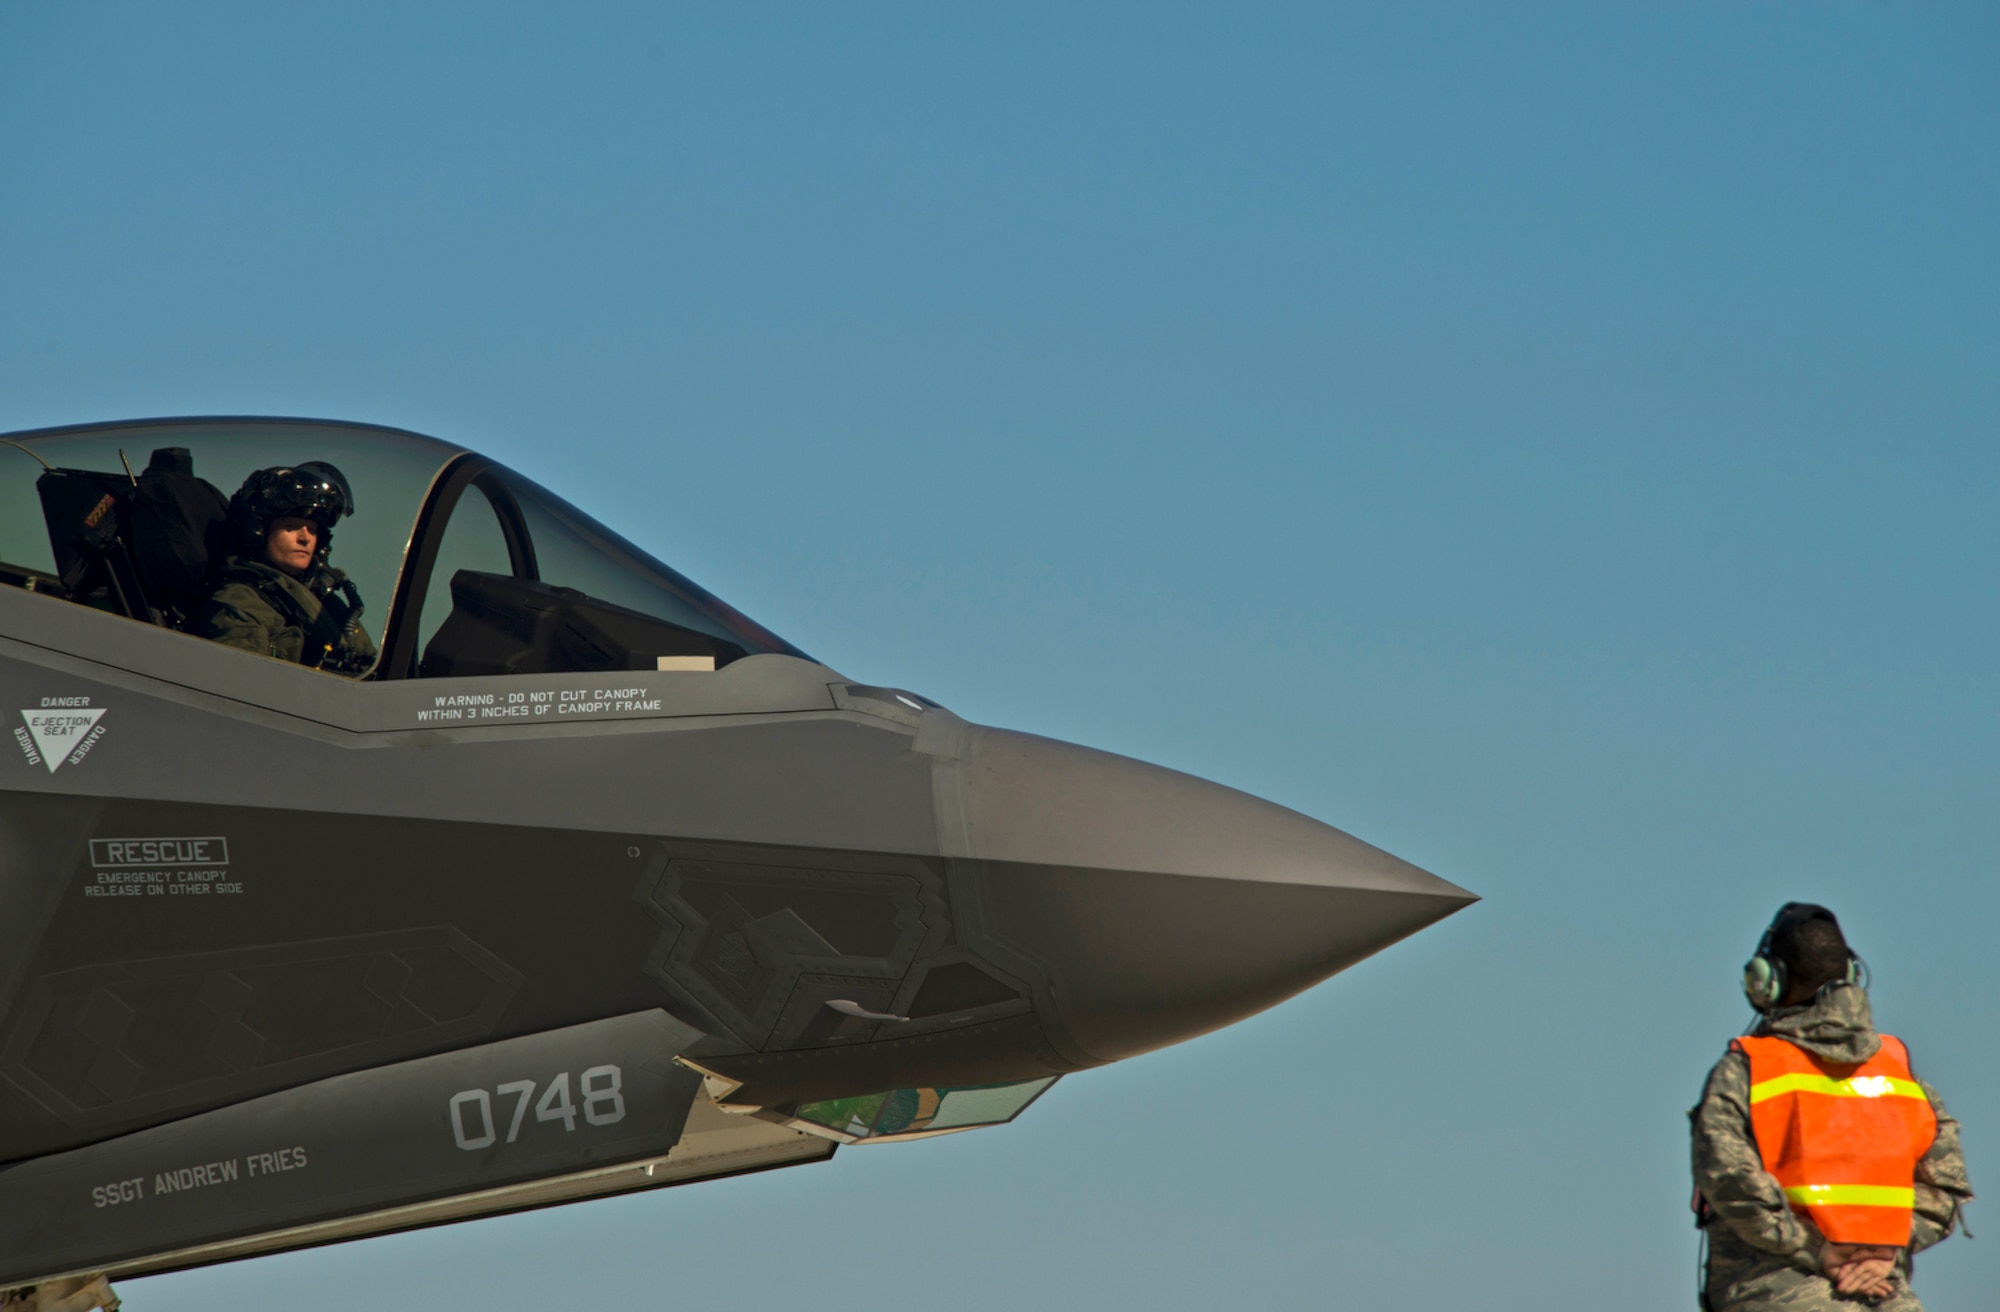 A F-35A Lightning II pilot of the 33d Fighter Wing, awaits taxing instructions after a hot-pit refueling, a procedure usually performed in a combat situation to rapidly refuel aircraft while their engines are running, resulting in a speedy refuel and getting pilots right back into the fight.(U.S. Air Force photo/Tech. Sgt. Bennie J. Davis III)